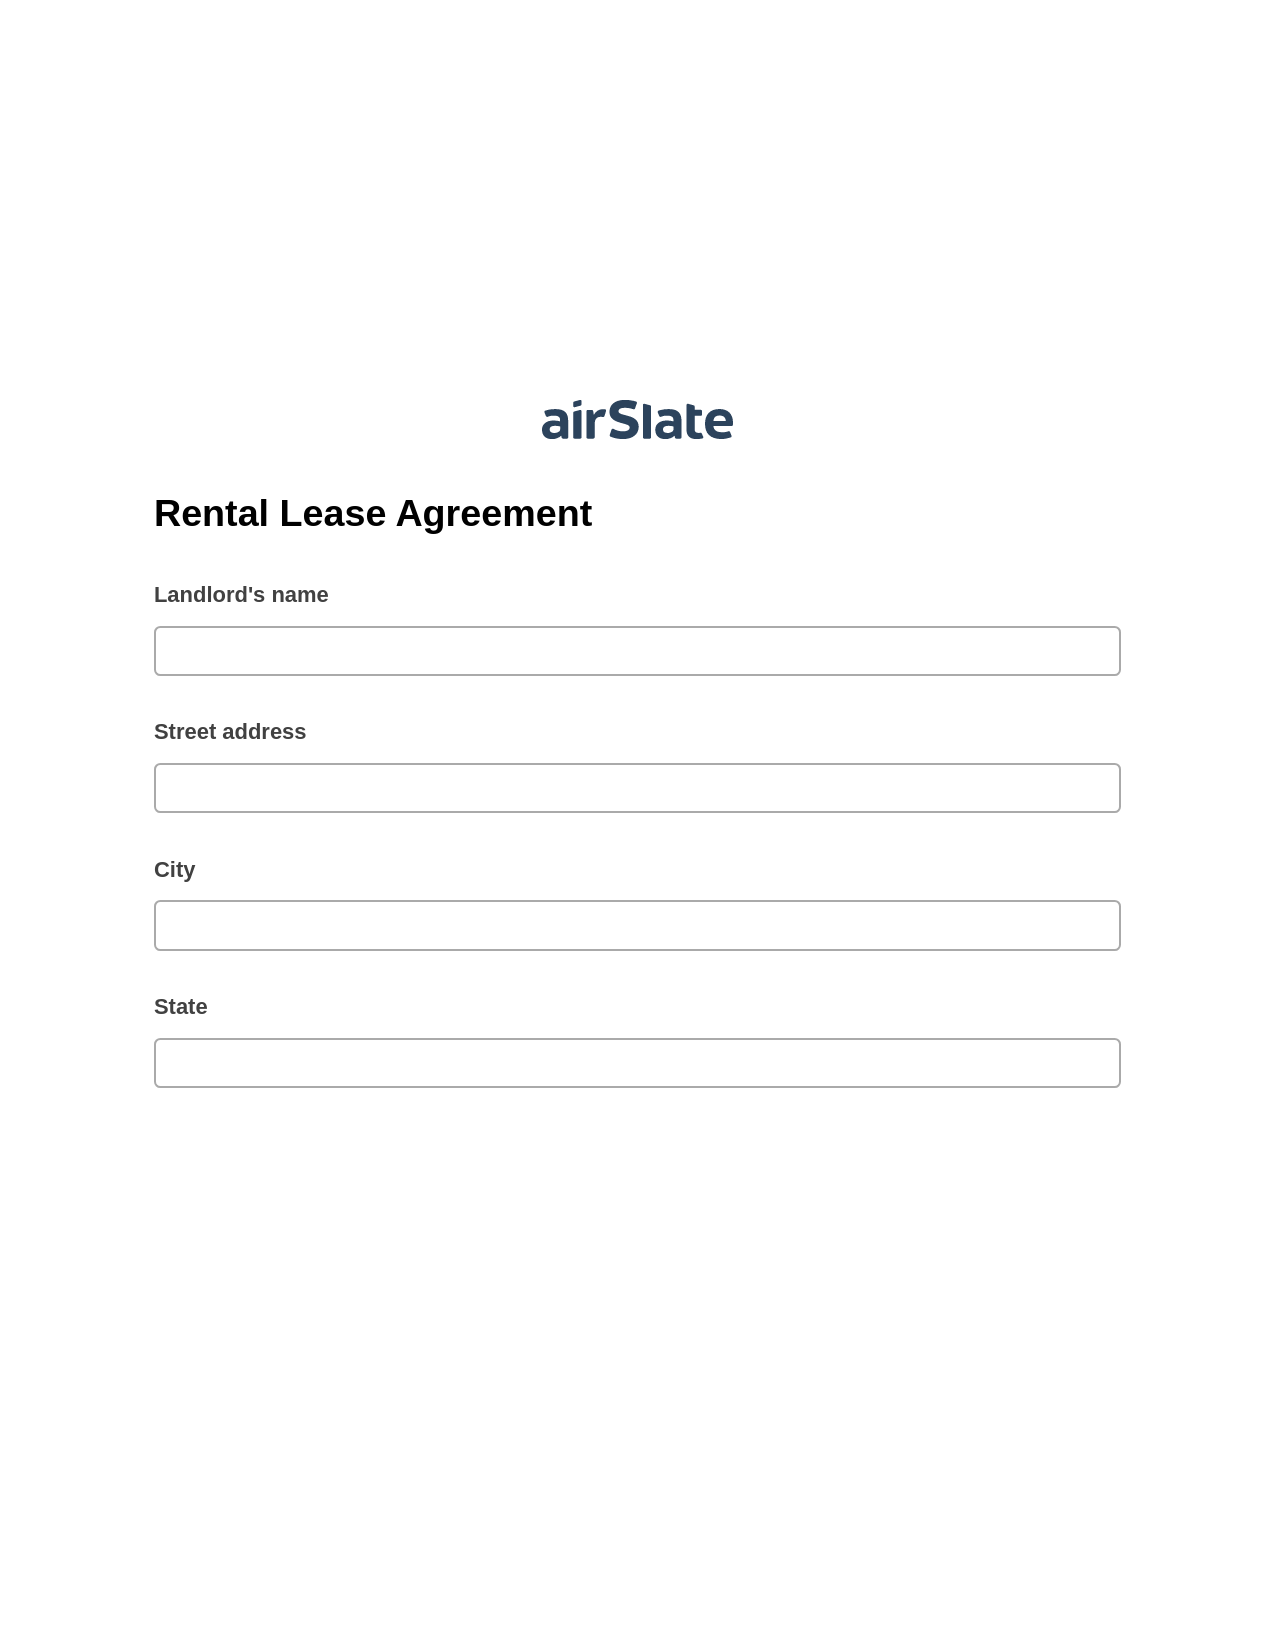 Rental Lease Agreement Pre-fill from Google Sheet Dropdown Options Bot, Jira Bot, Export to NetSuite Record Bot